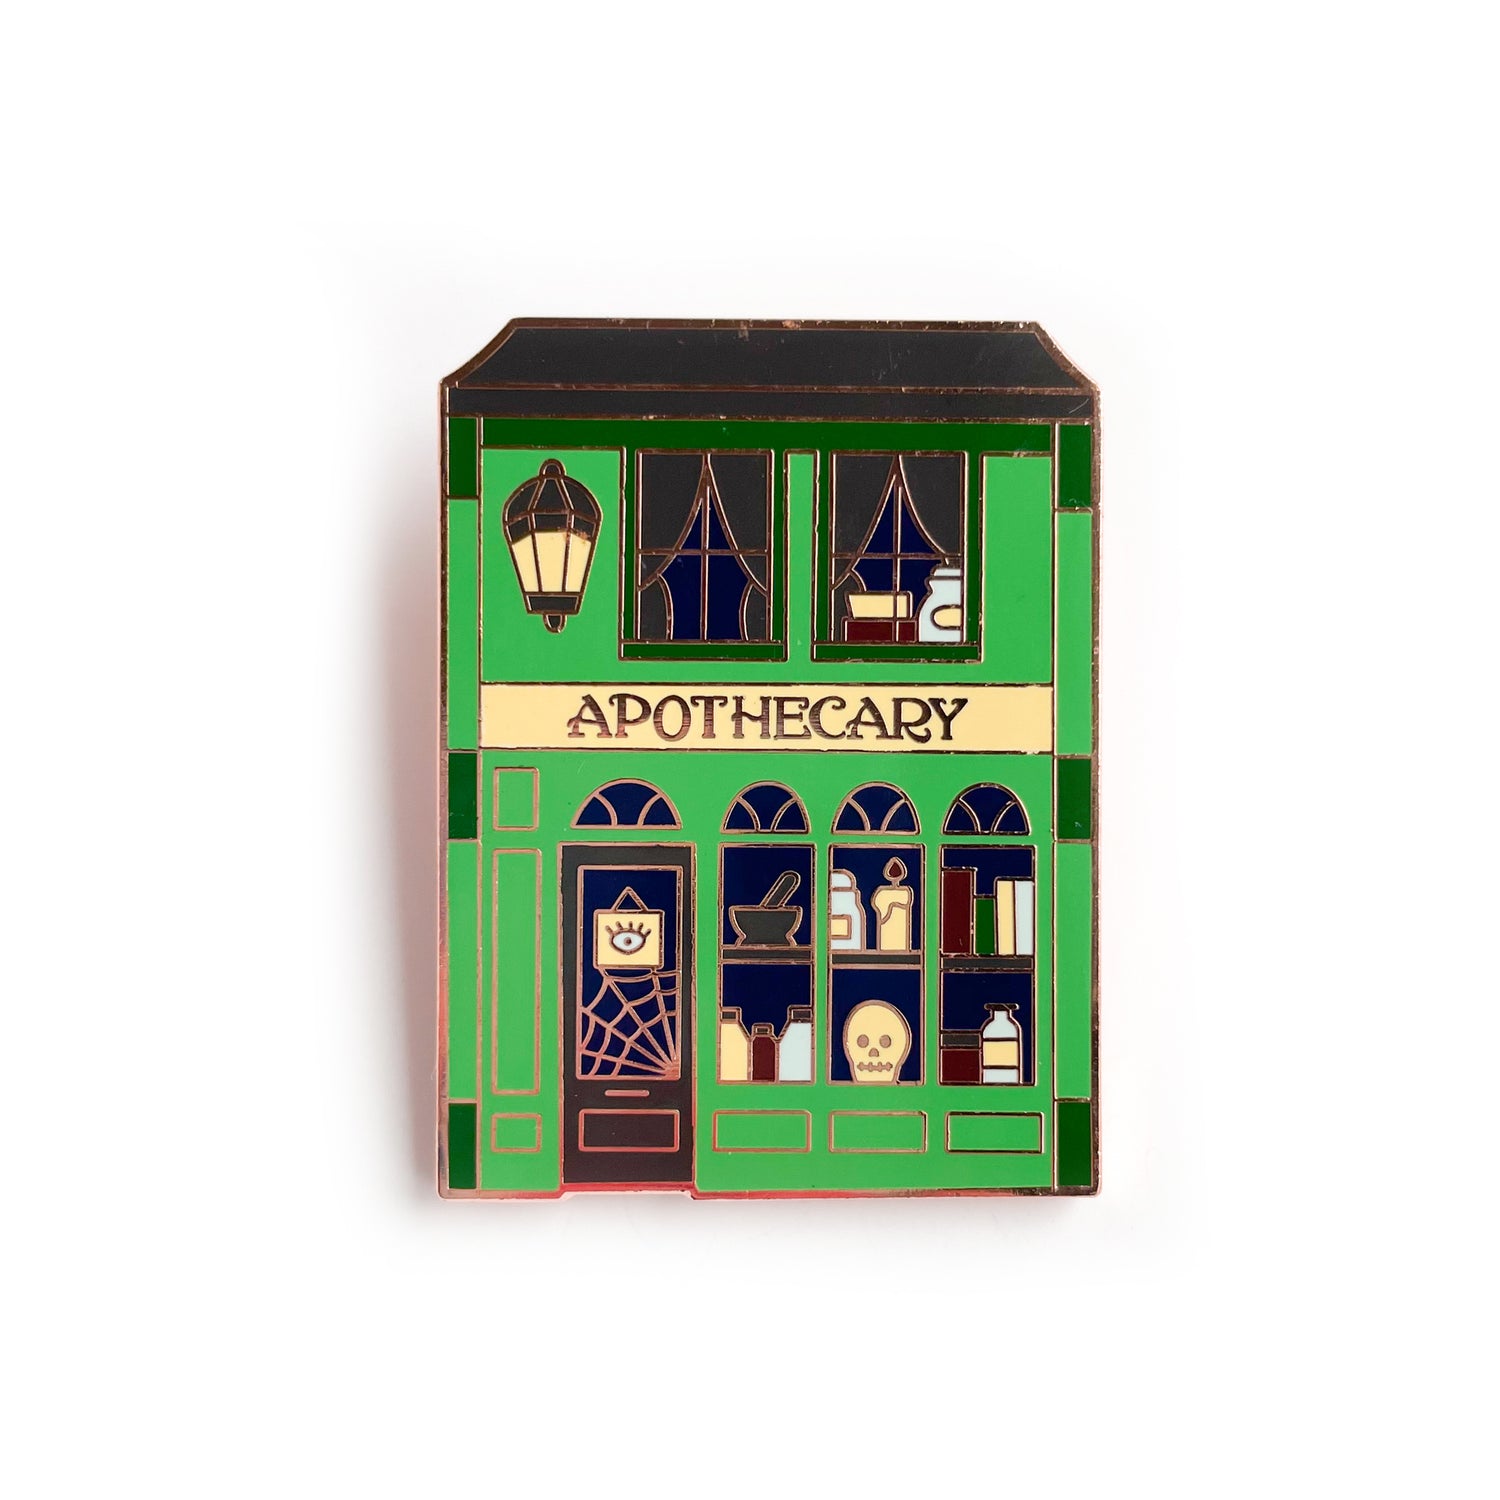 A pin shaped like a storefront with the word "Apothecary" across it. The windows of the shop are full of magic books, a skull, a candle, and a spiderweb